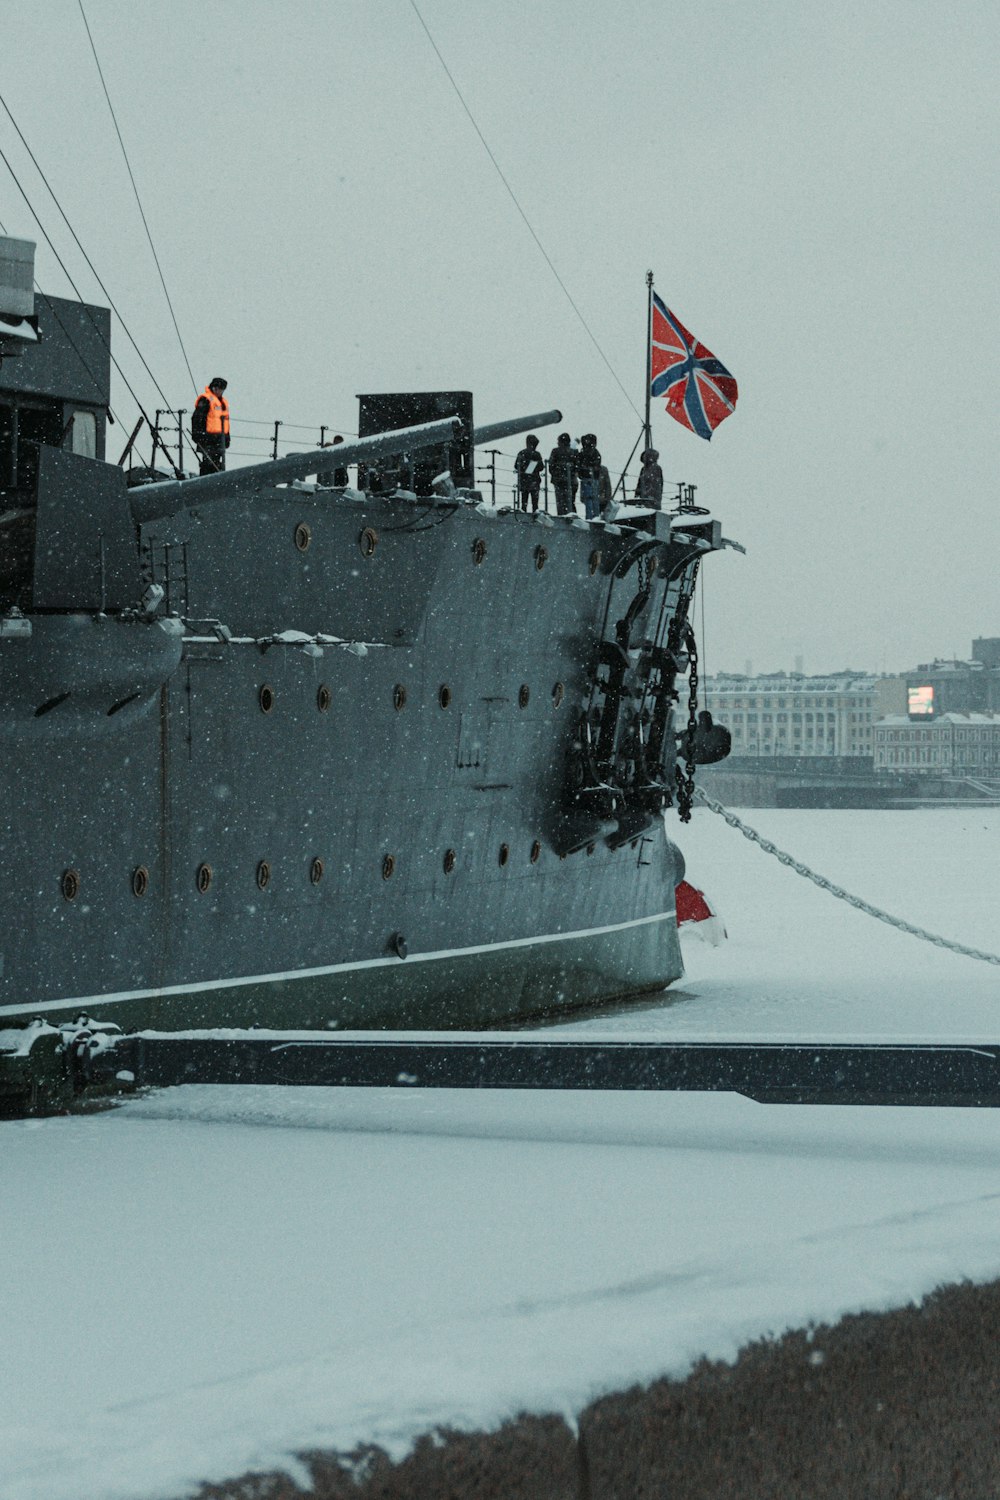 a large boat with a flag on top of it in the snow